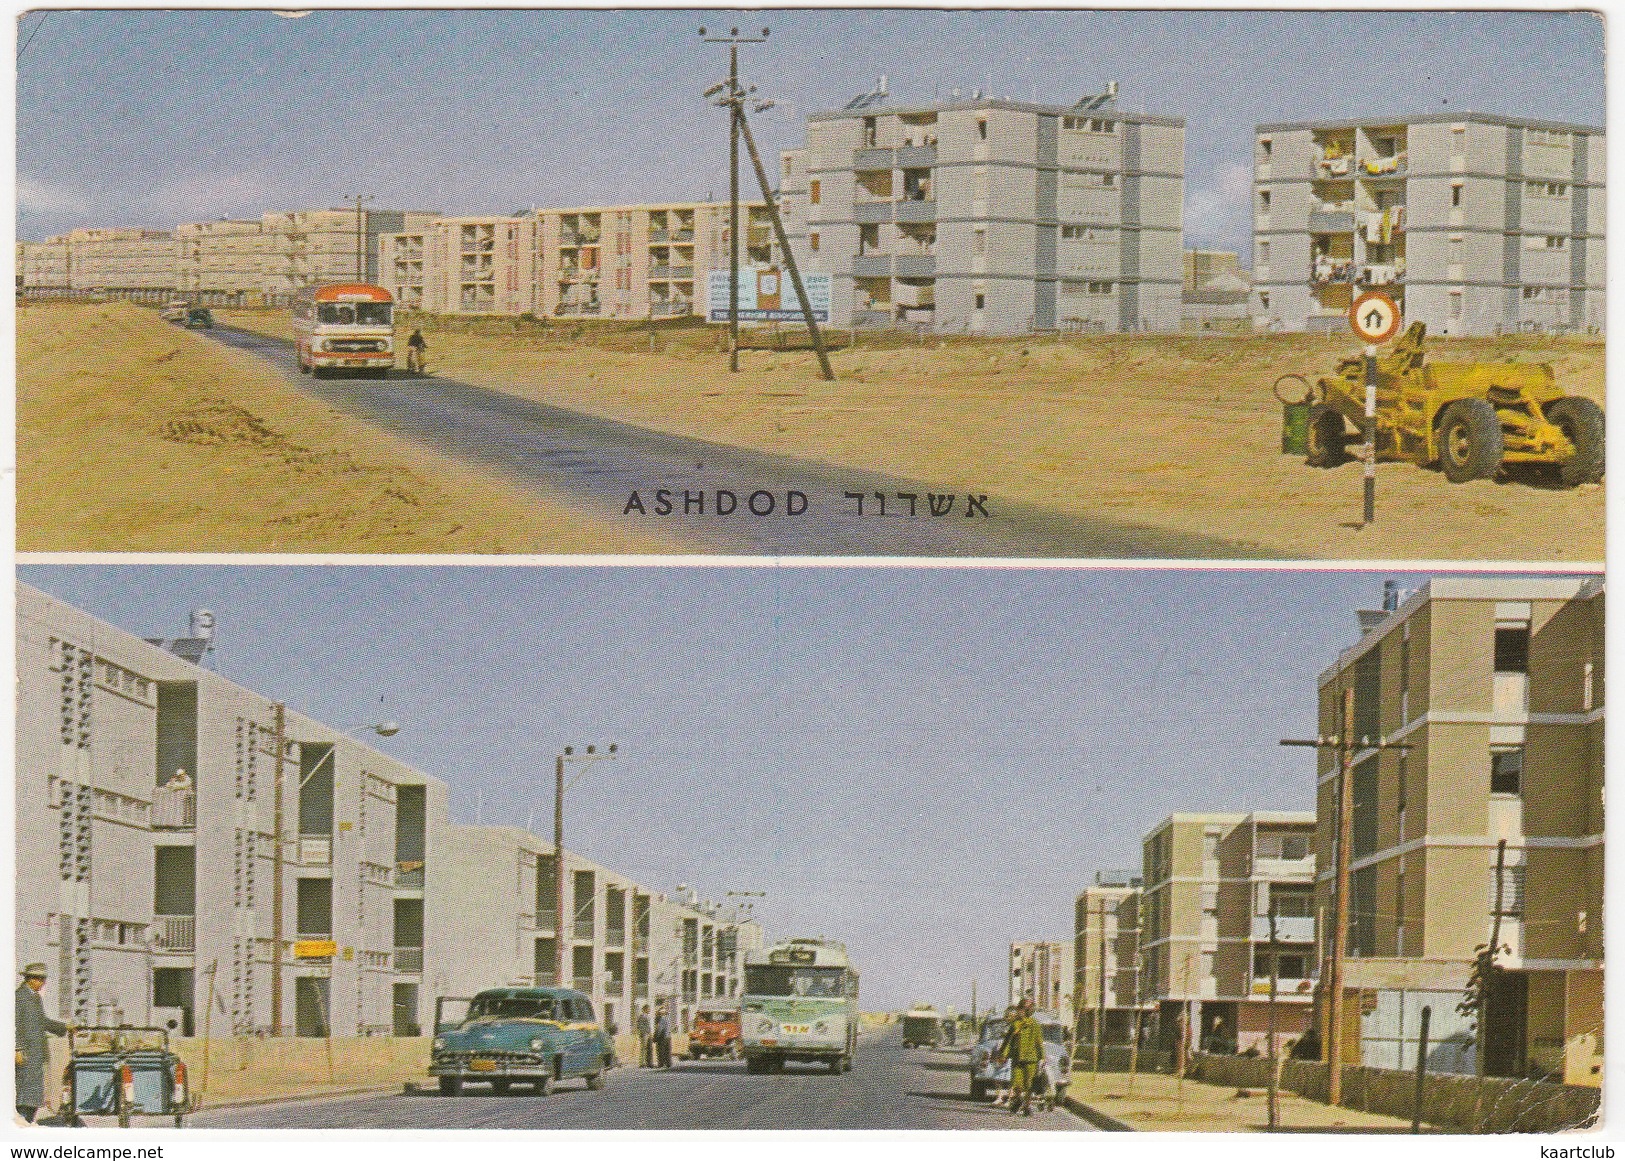 Ashdod: PLYMOUTH SEDAN '53, FREIGHT BICYCLE, 2x AUTOBUS/COACH, CONSTRUCTION VEHICLE - New Town Of The Future - (Israël) - PKW